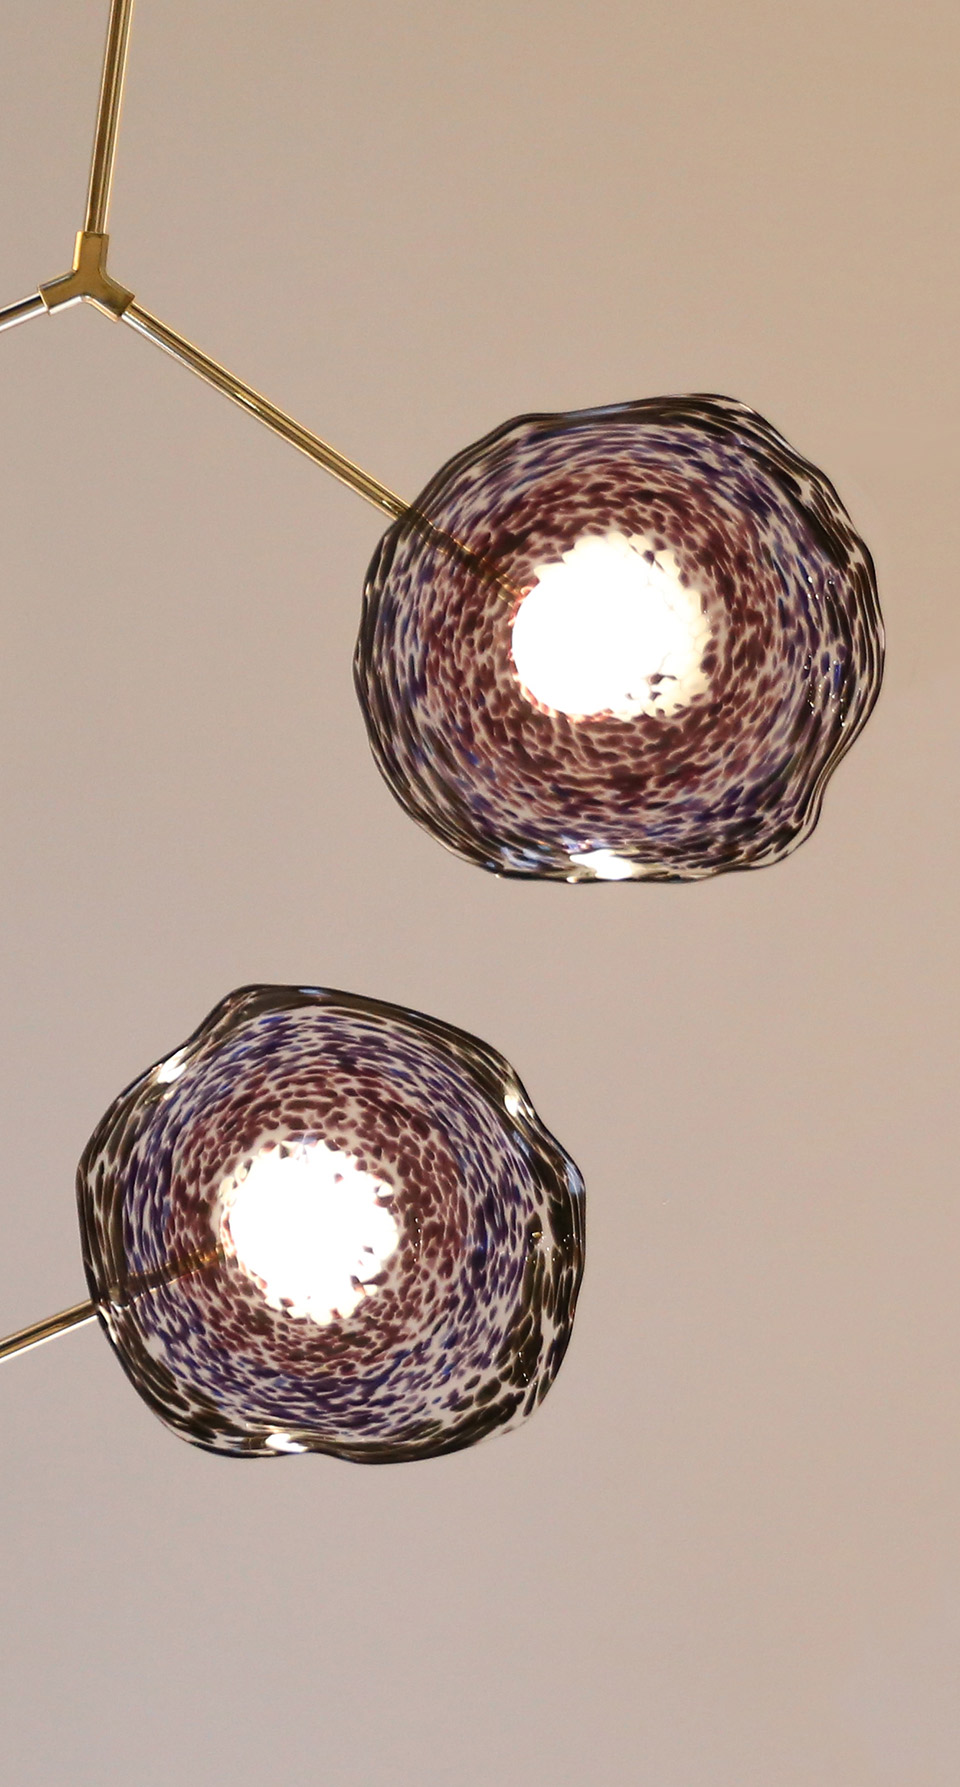 Luxury Ceiling Luminaire Handcrafted Gold Framework Delicate Glass Shades Purple White Tones Nulty Bespoke